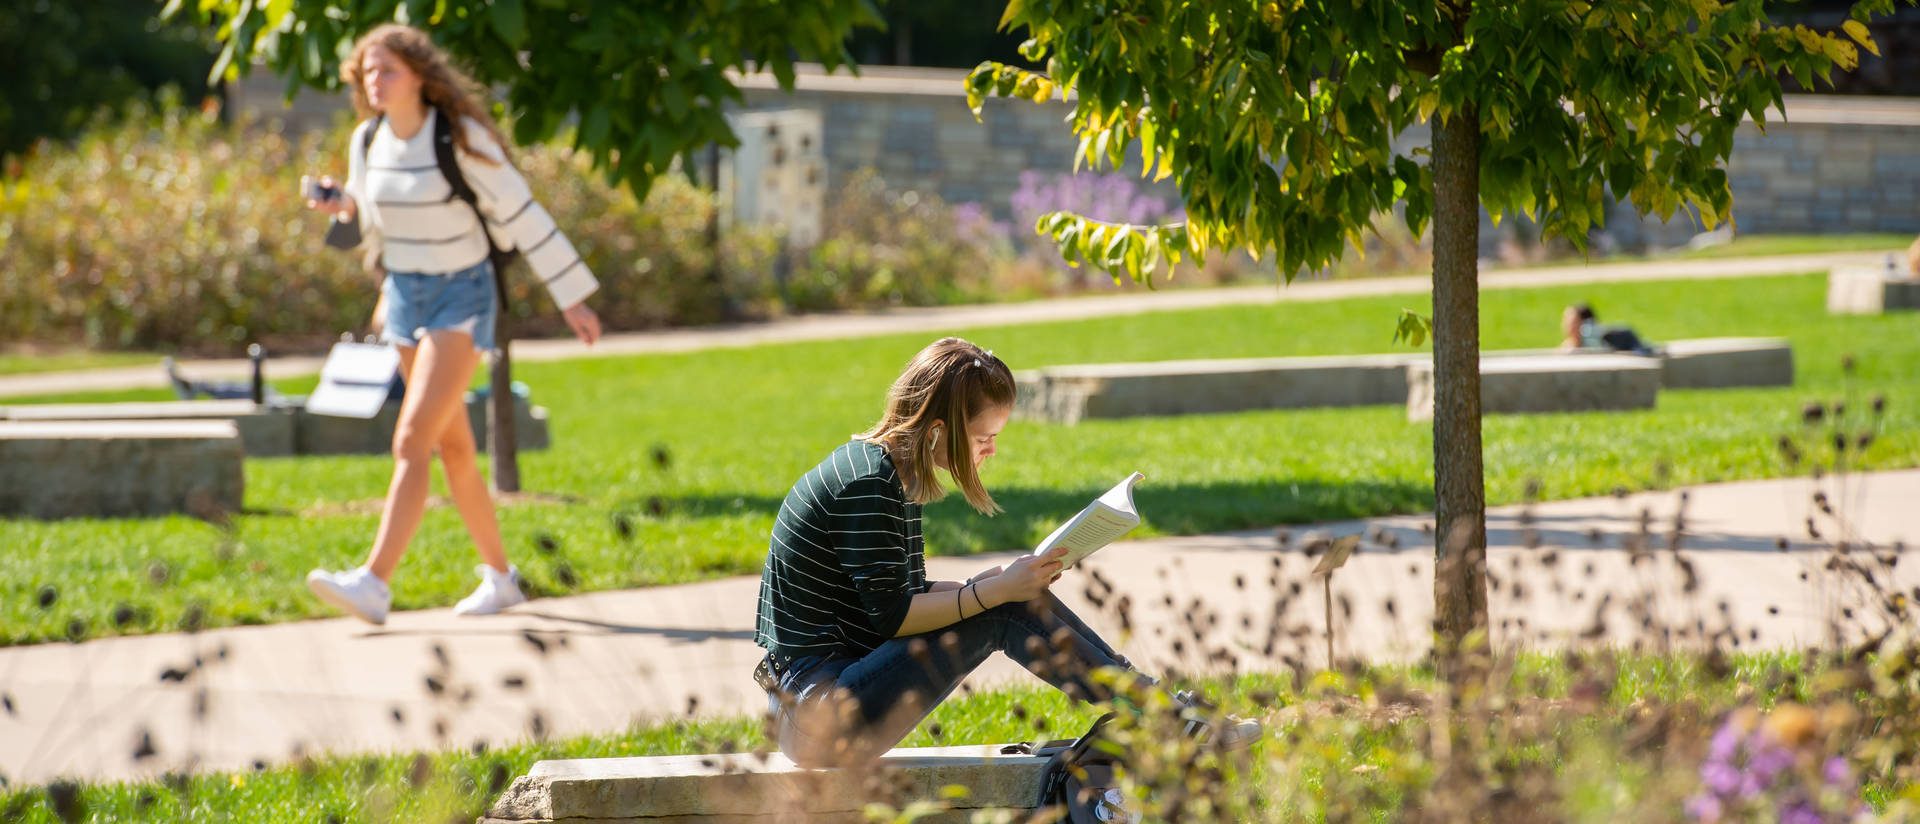 Student reads a book while sitting outside on a sunny day.